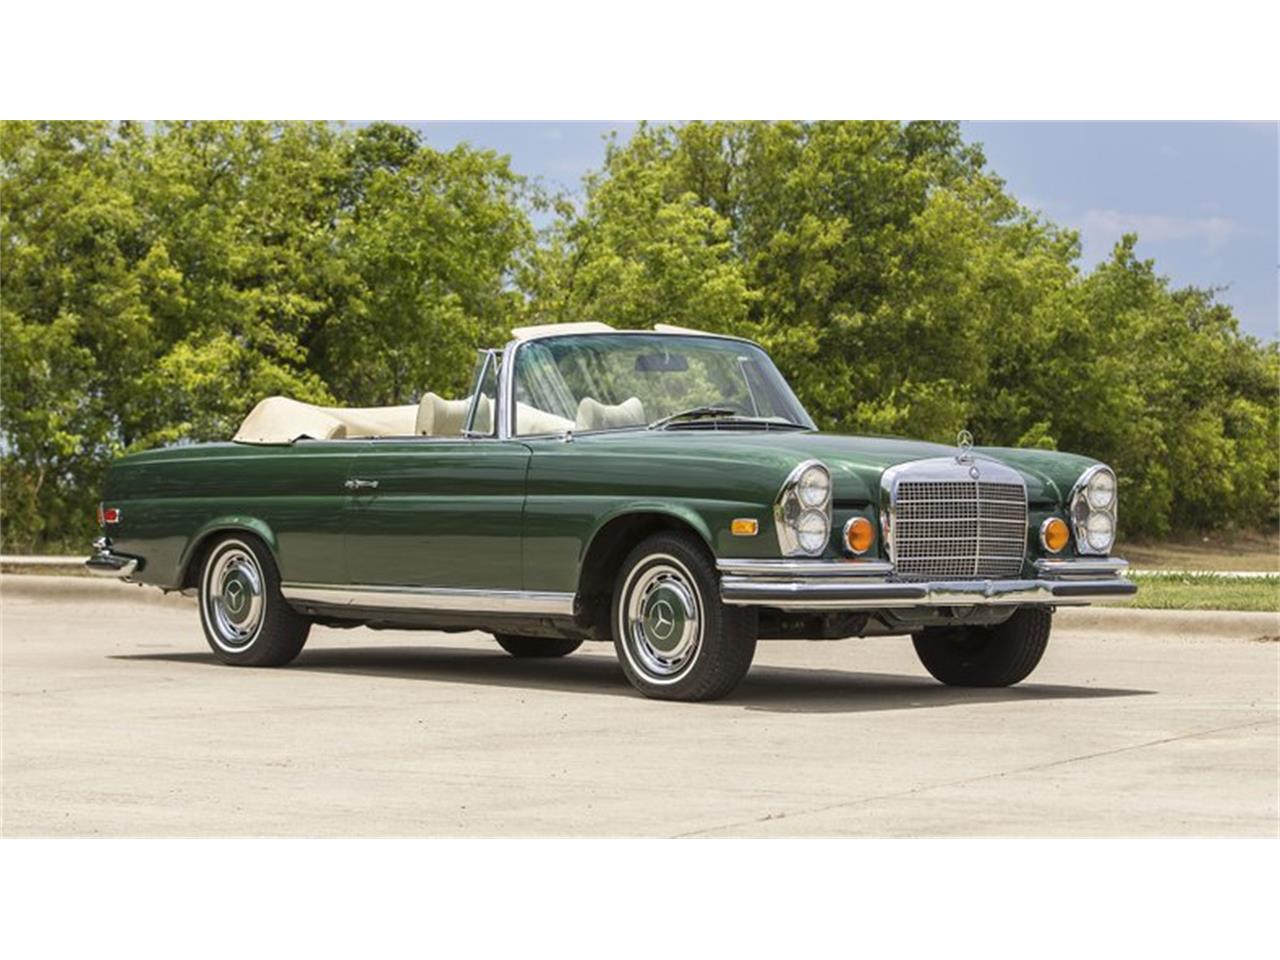 For Sale at Auction: 1971 Mercedes-Benz 280 in Monterey, California for sale in Monterey, CA